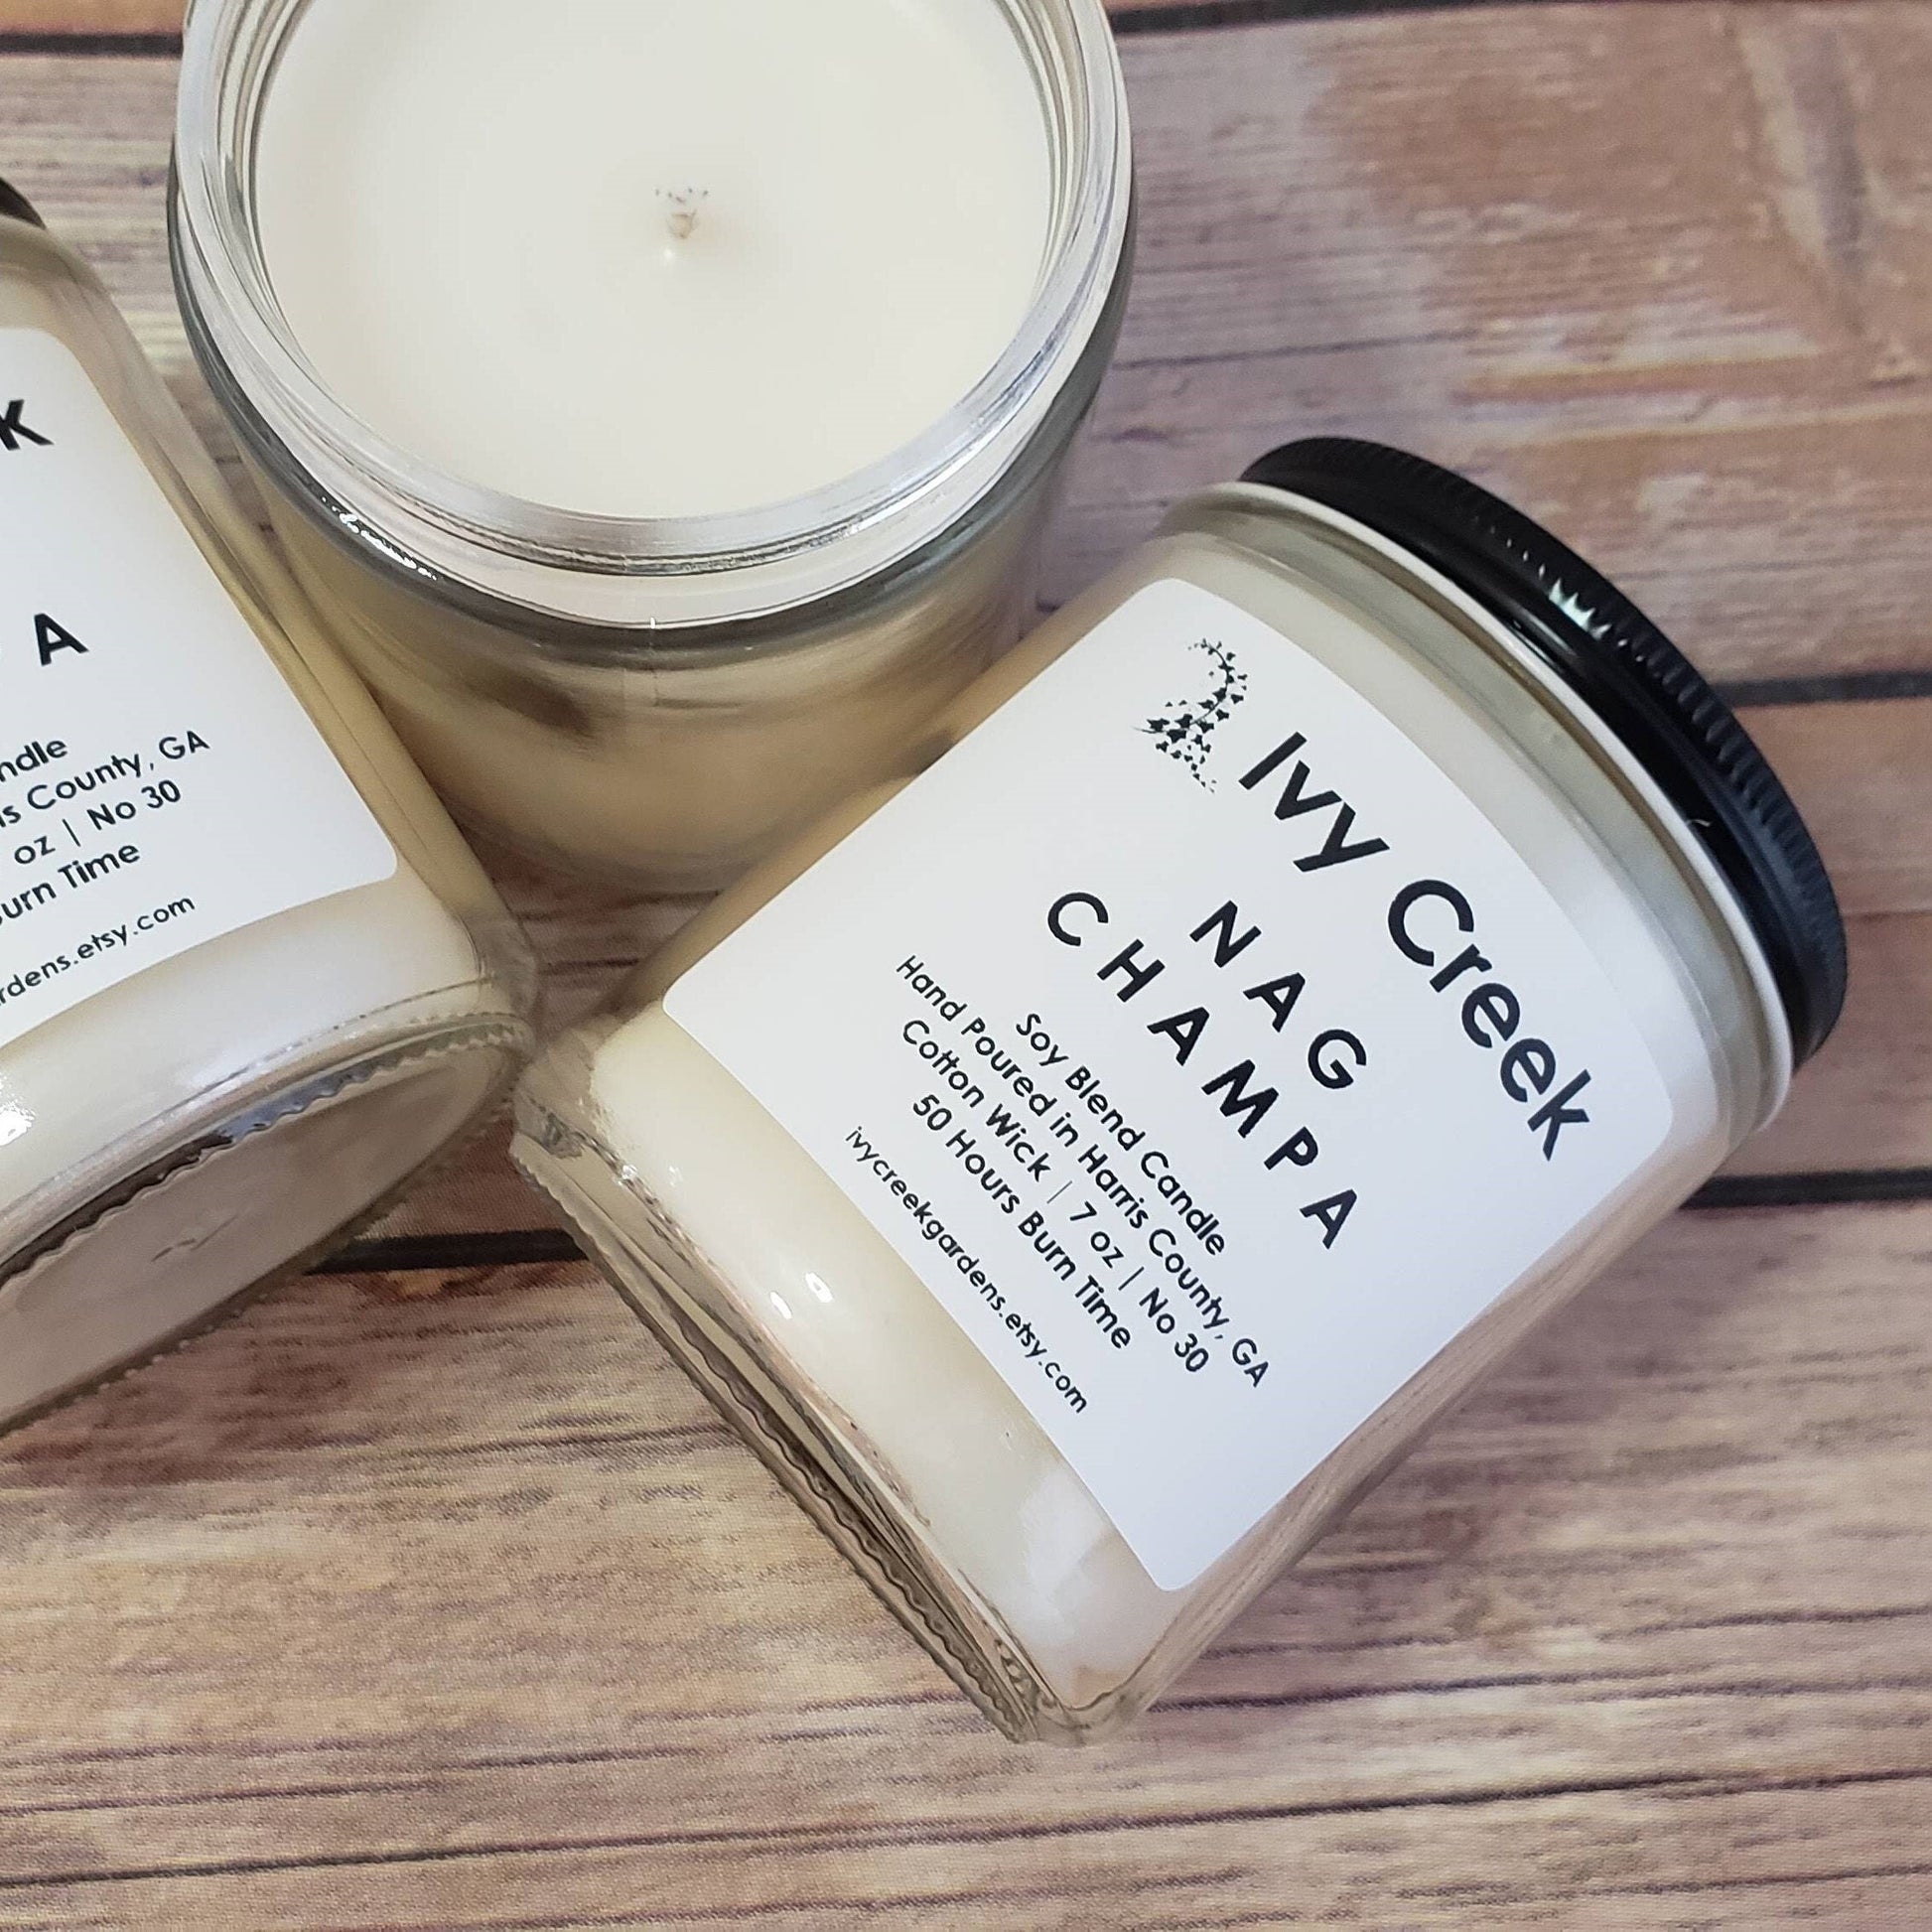 Ivy Creek No 30 | Nag Champa Exotic Aroma Soy Blend Candle | Hand Poured | 7 oz | Cotton Wick | Small Batch | Clean Burning | Container